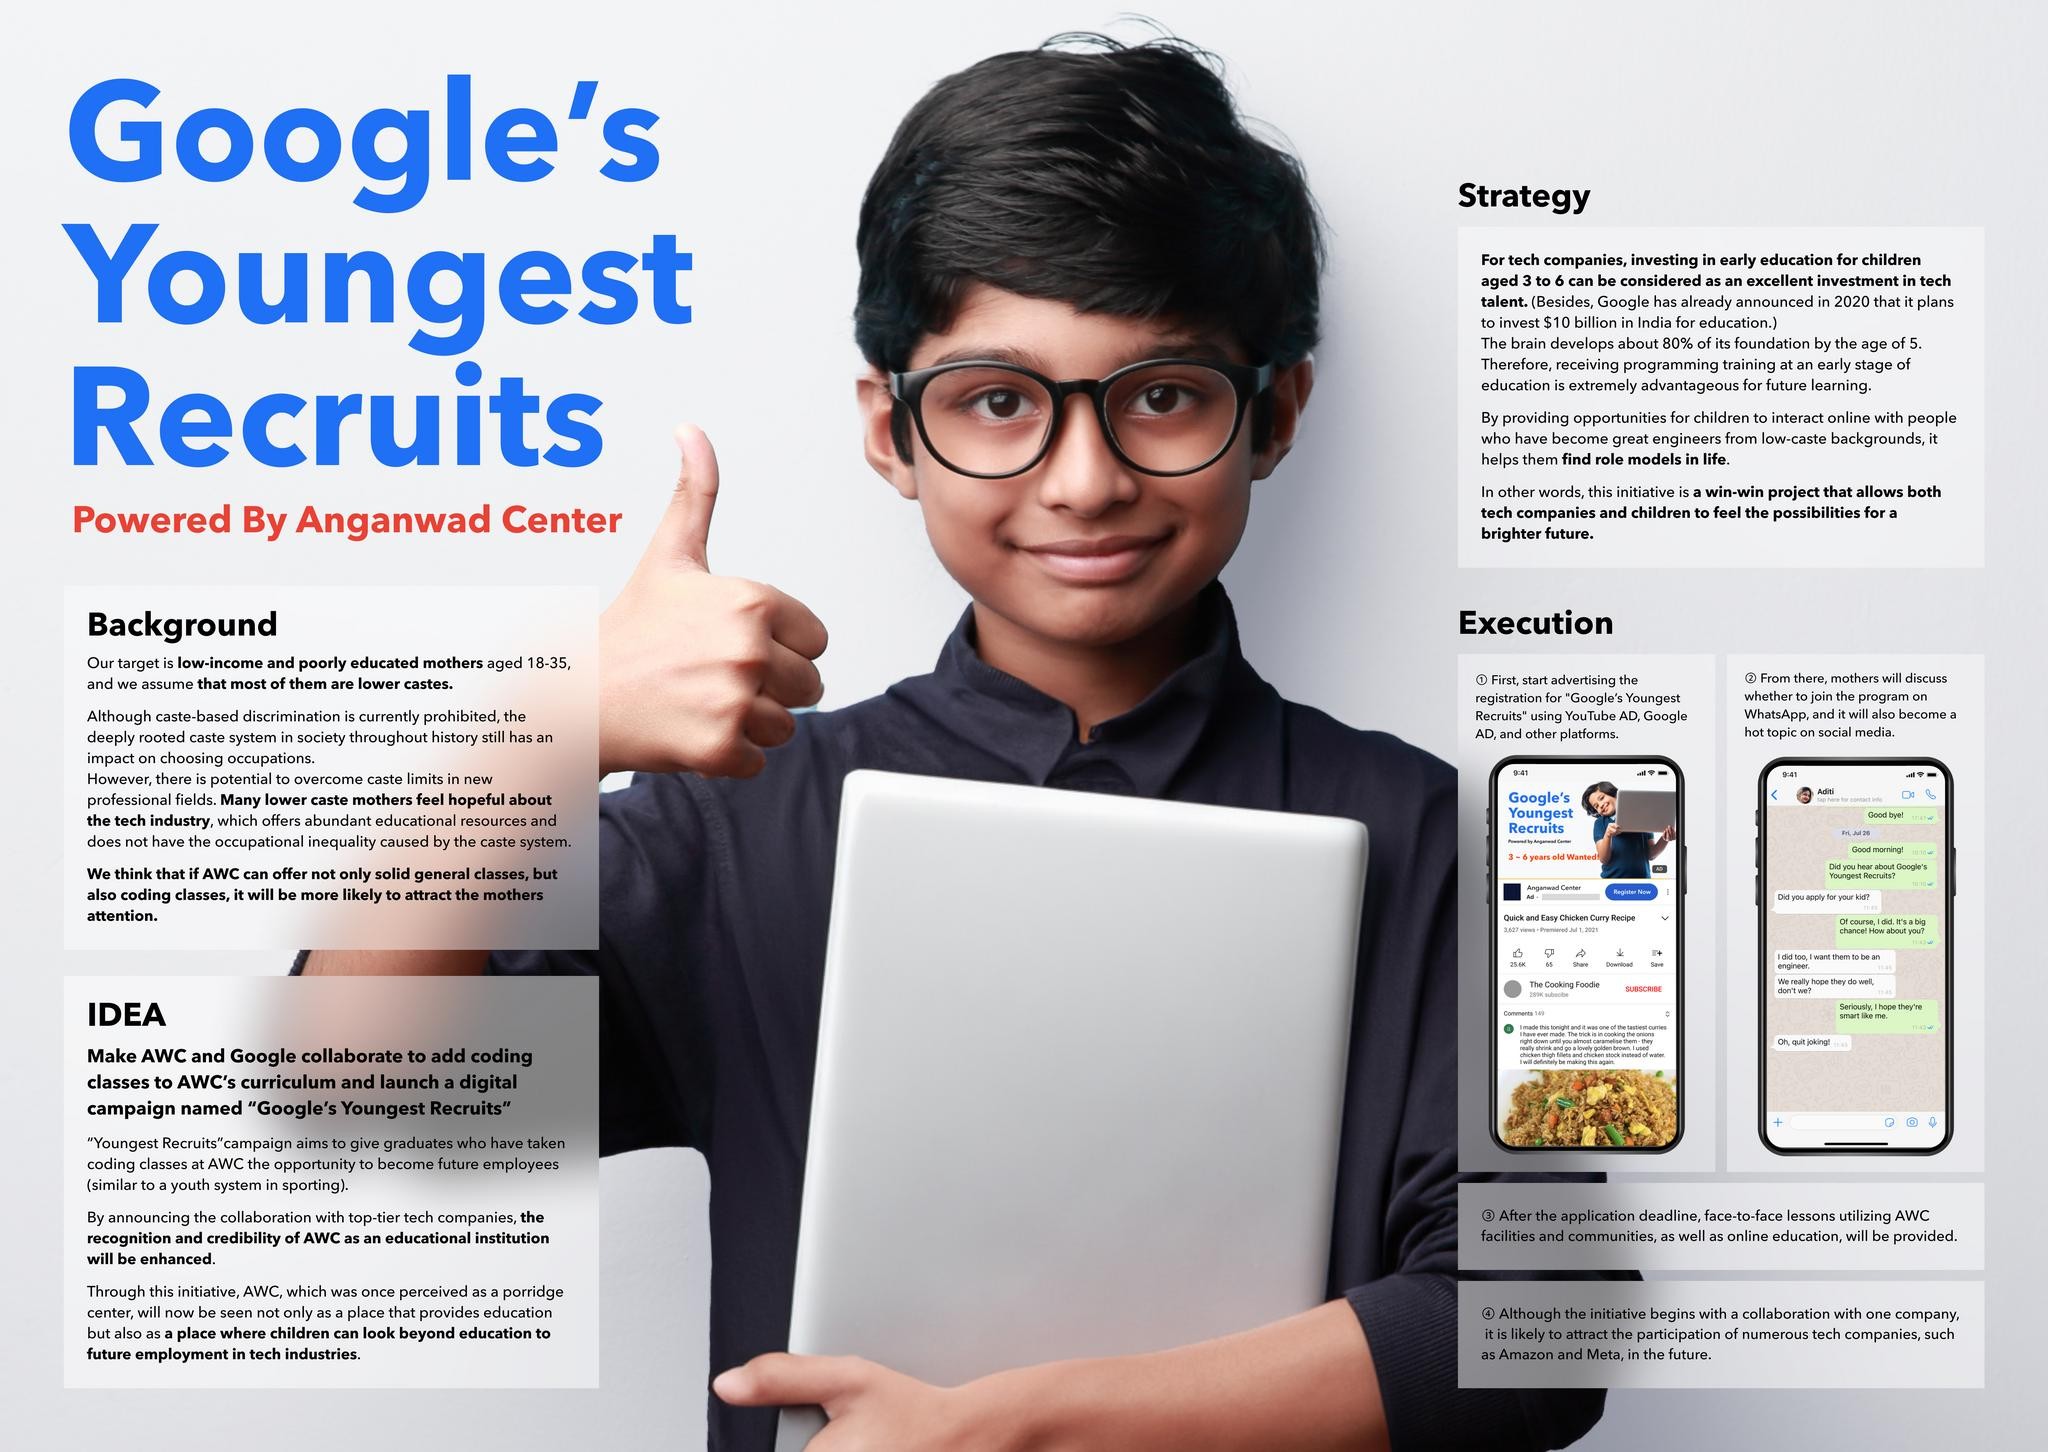 Google's Youngest Recruits.